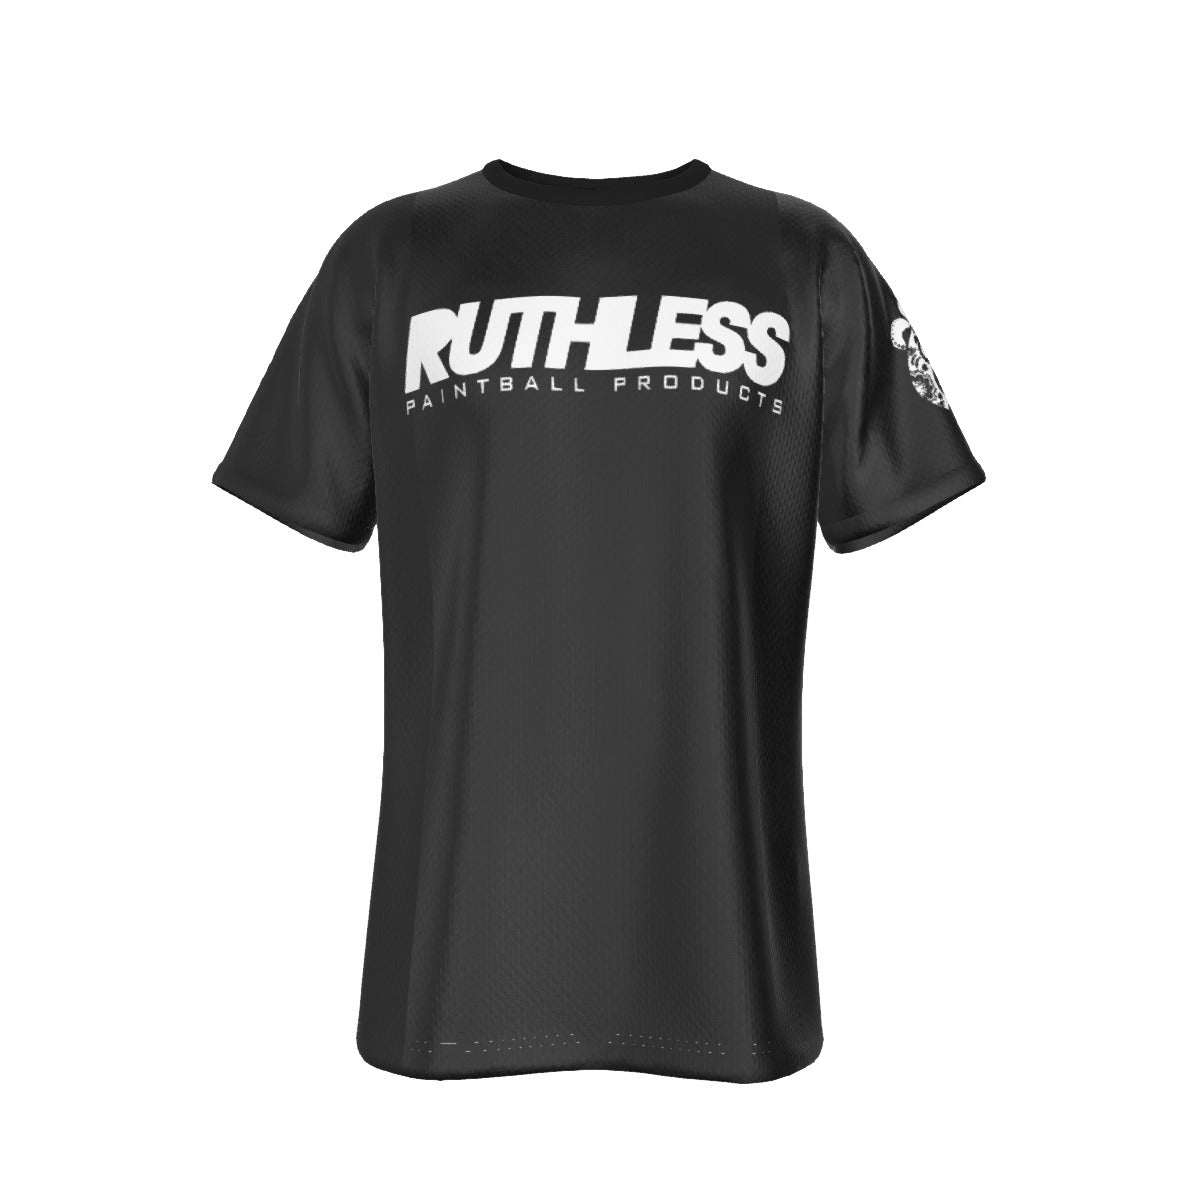 Ruthless Spin - Black